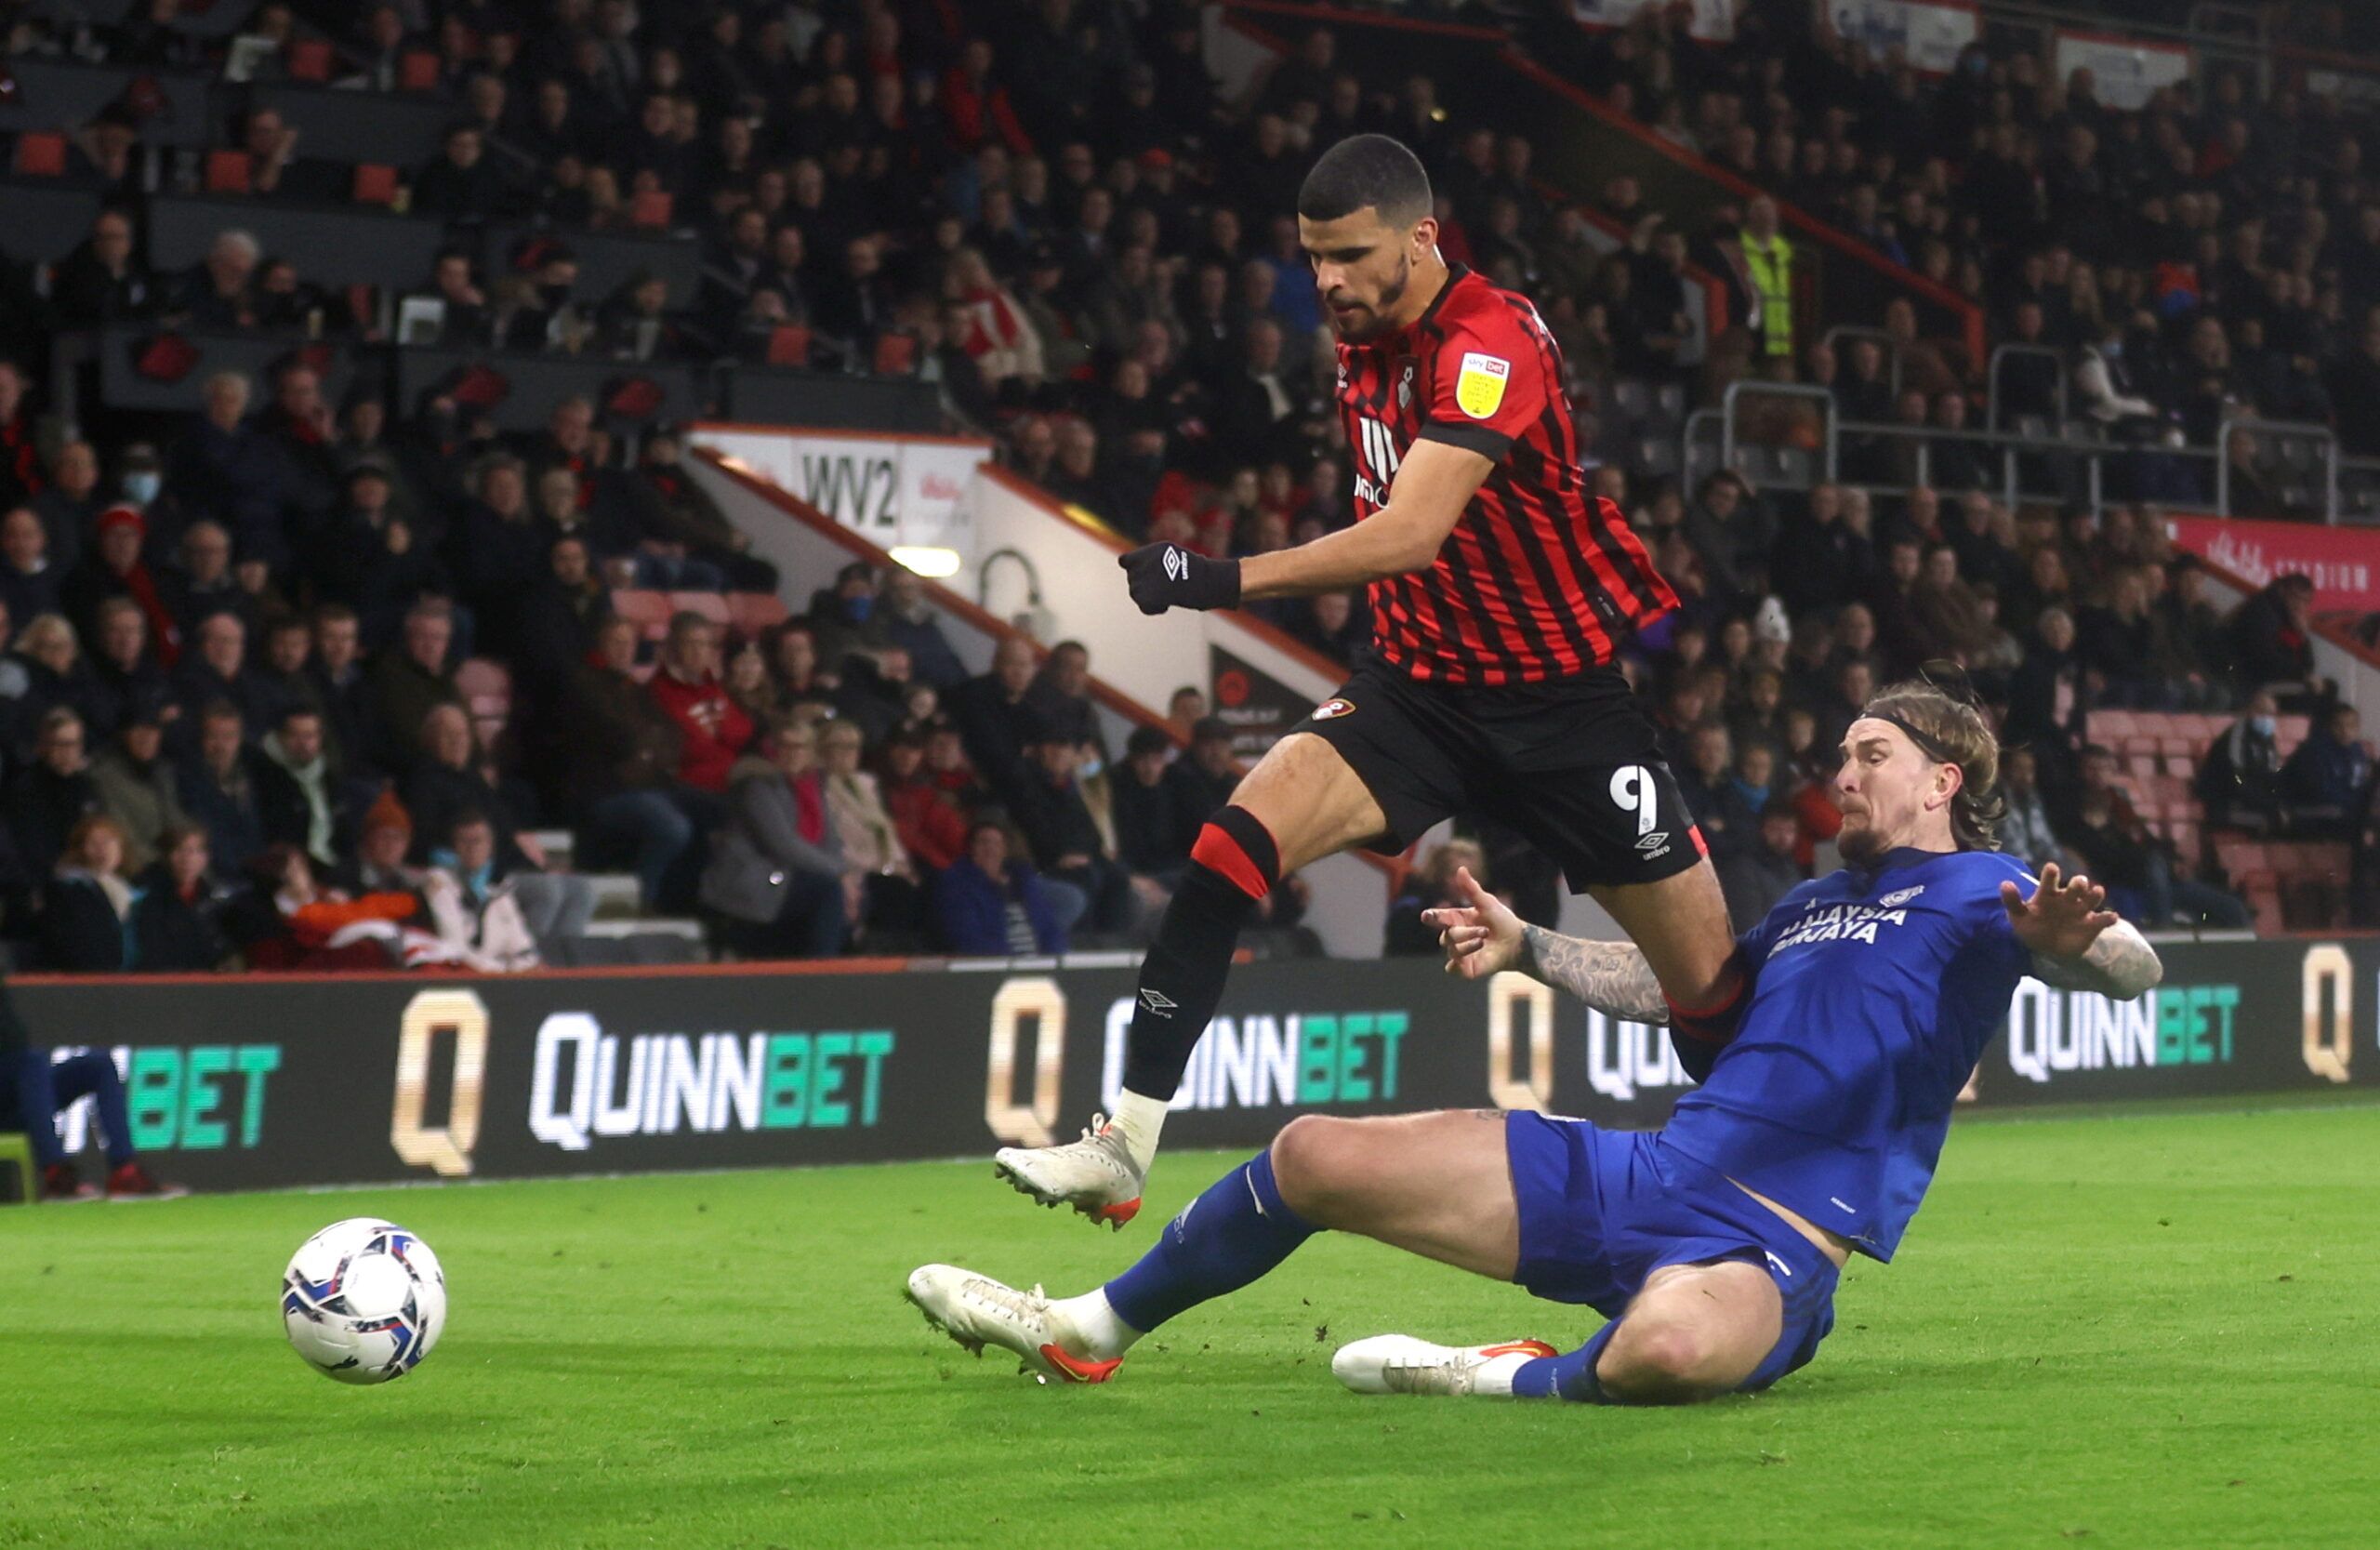 Soccer Football - Championship - AFC Bournemouth v Cardiff City - Vitality Stadium, Bournemouth, Britain - December 30, 2021  AFC Bournemouth's Dominic Solanke in action with Cardiff City's Aden Flint   Action Images/Matthew Childs  EDITORIAL USE ONLY. No use with unauthorized audio, video, data, fixture lists, club/league logos or 